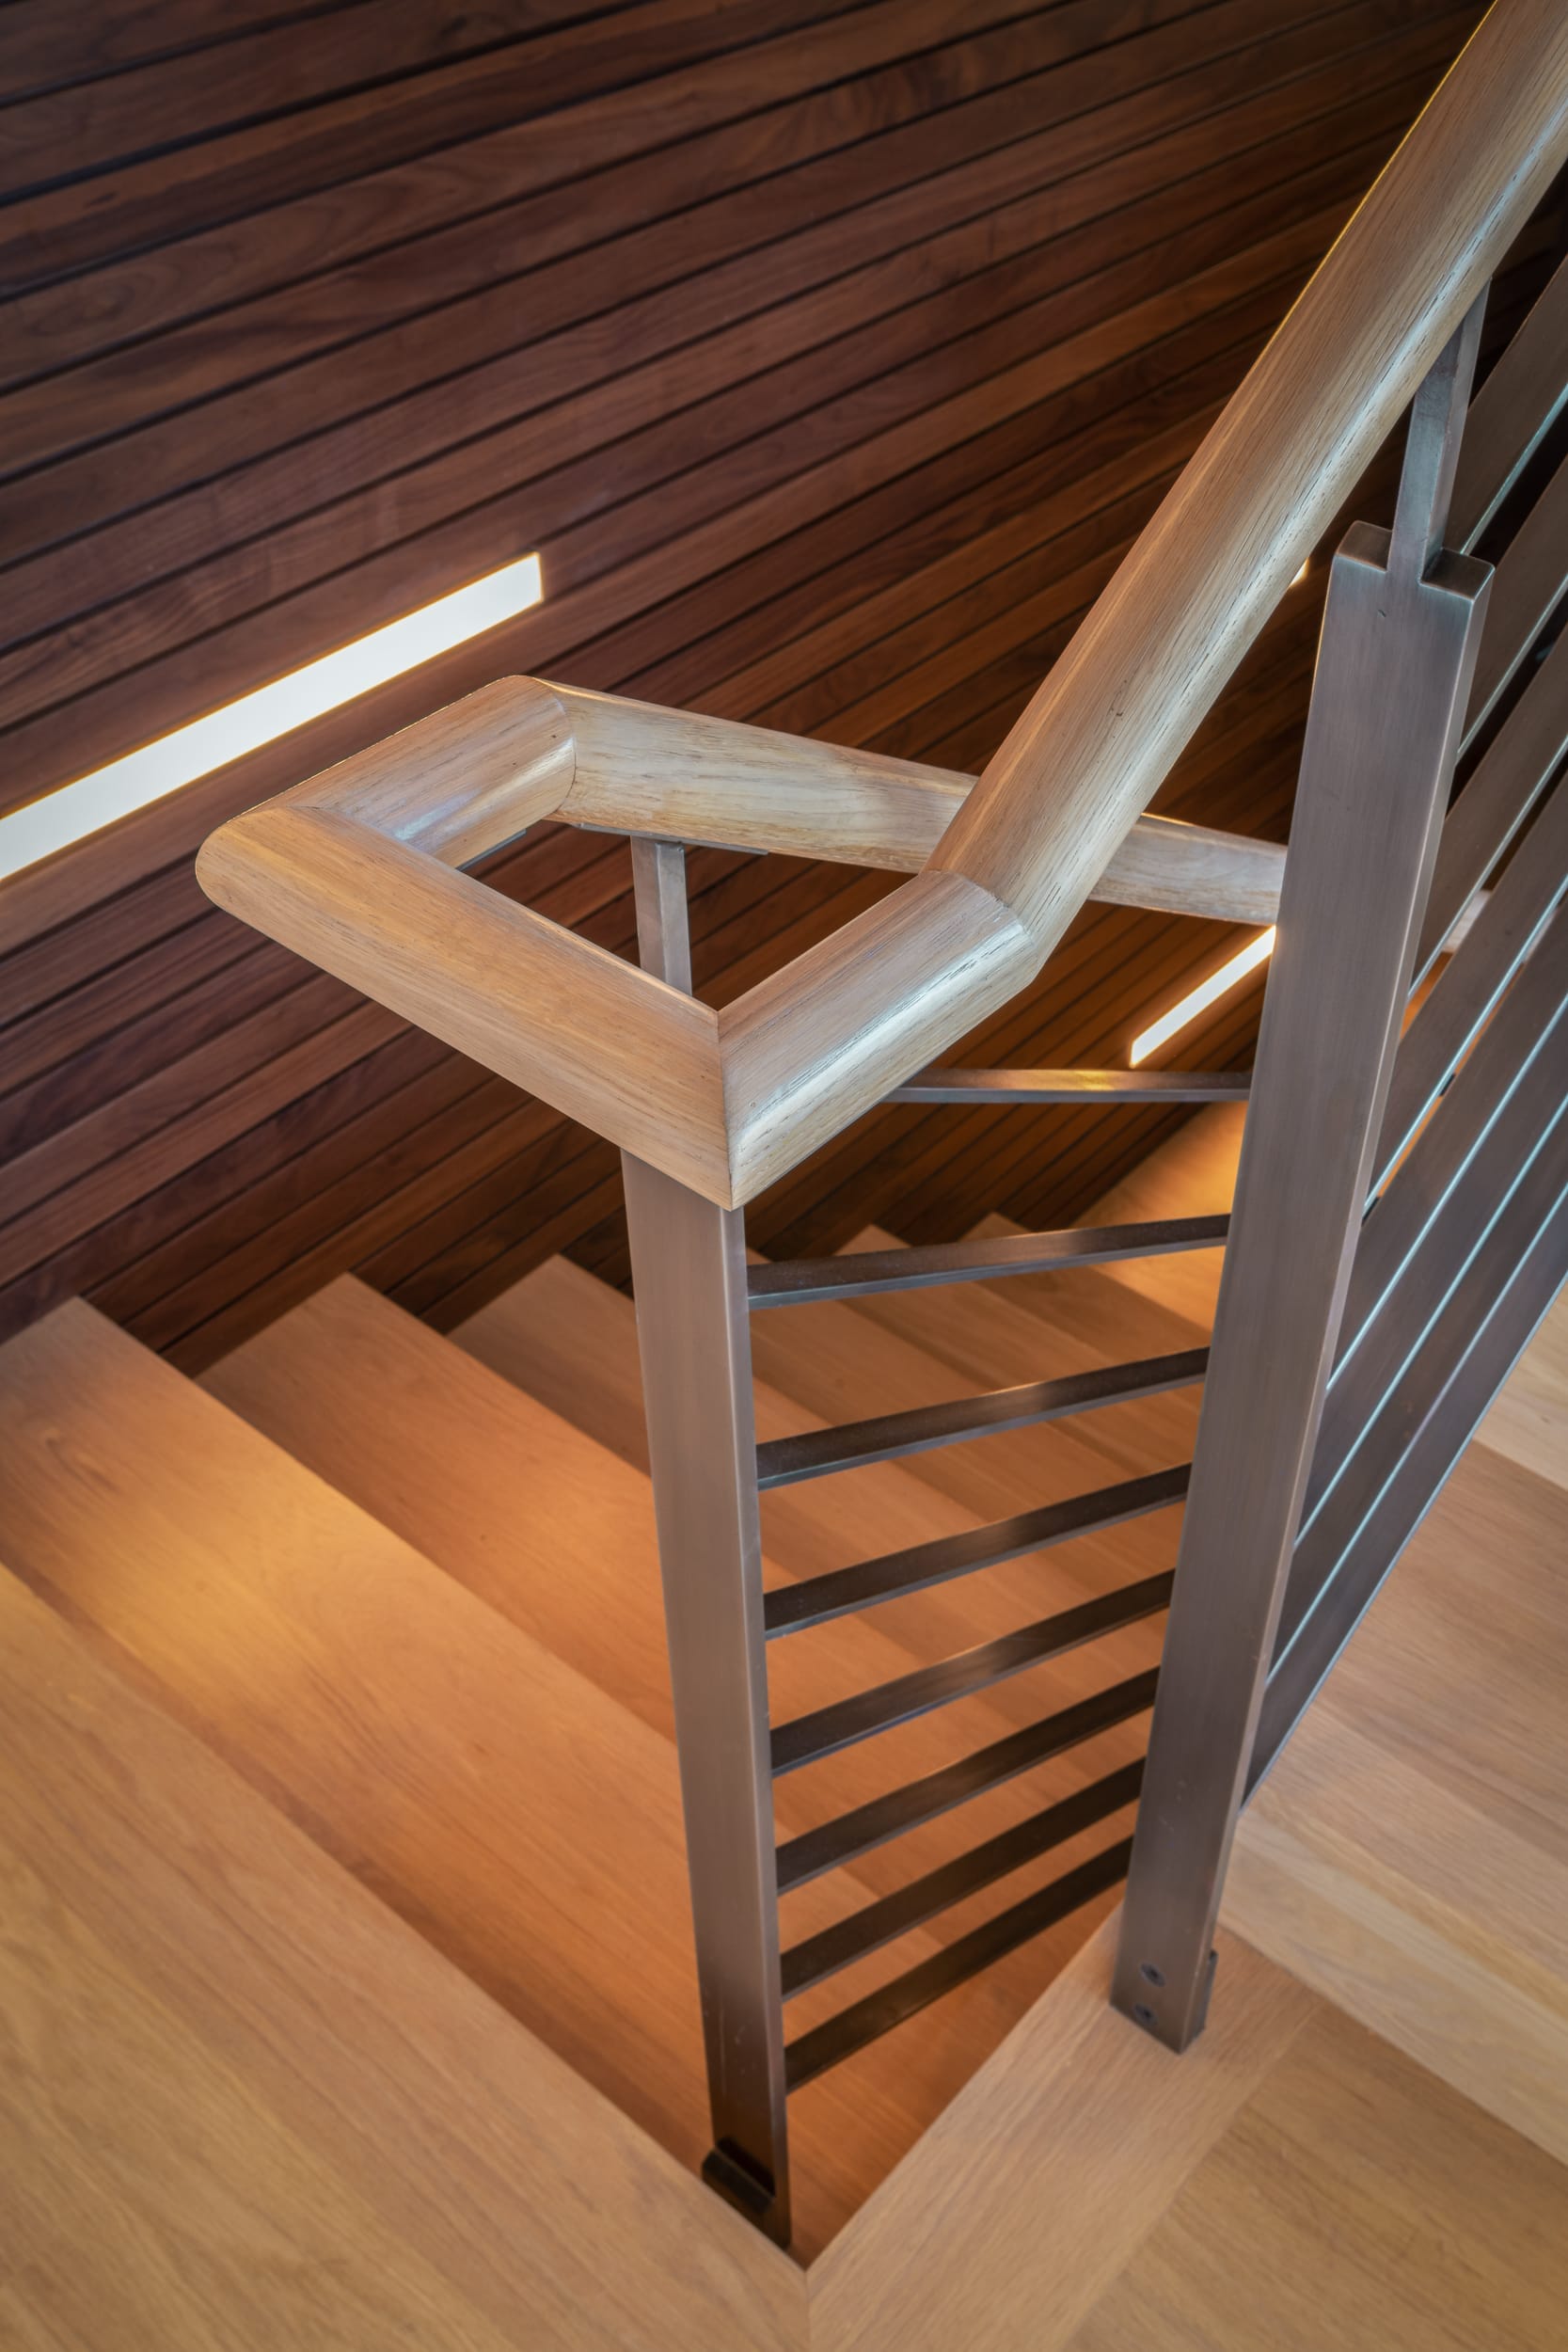 A modern stair railing in a wooden house.